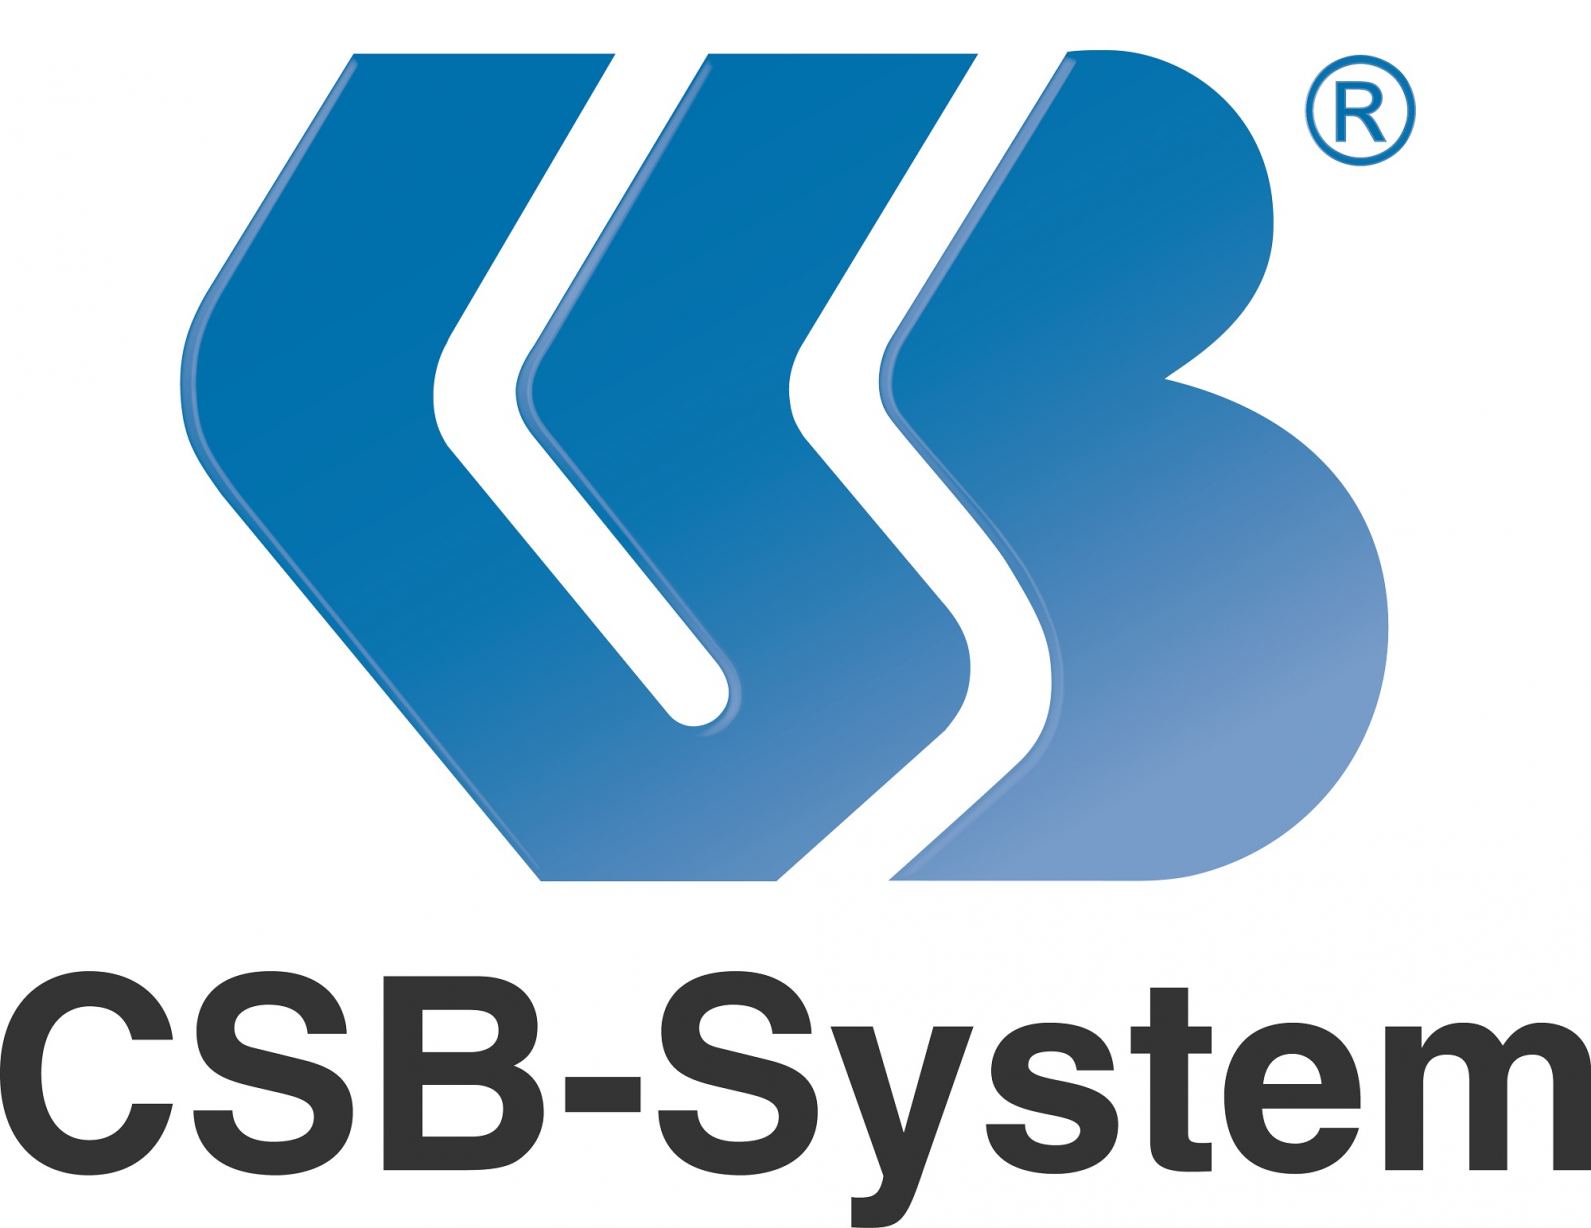 CSB-System announces Mike O'Toole as the new Director of Sales, Canada ...